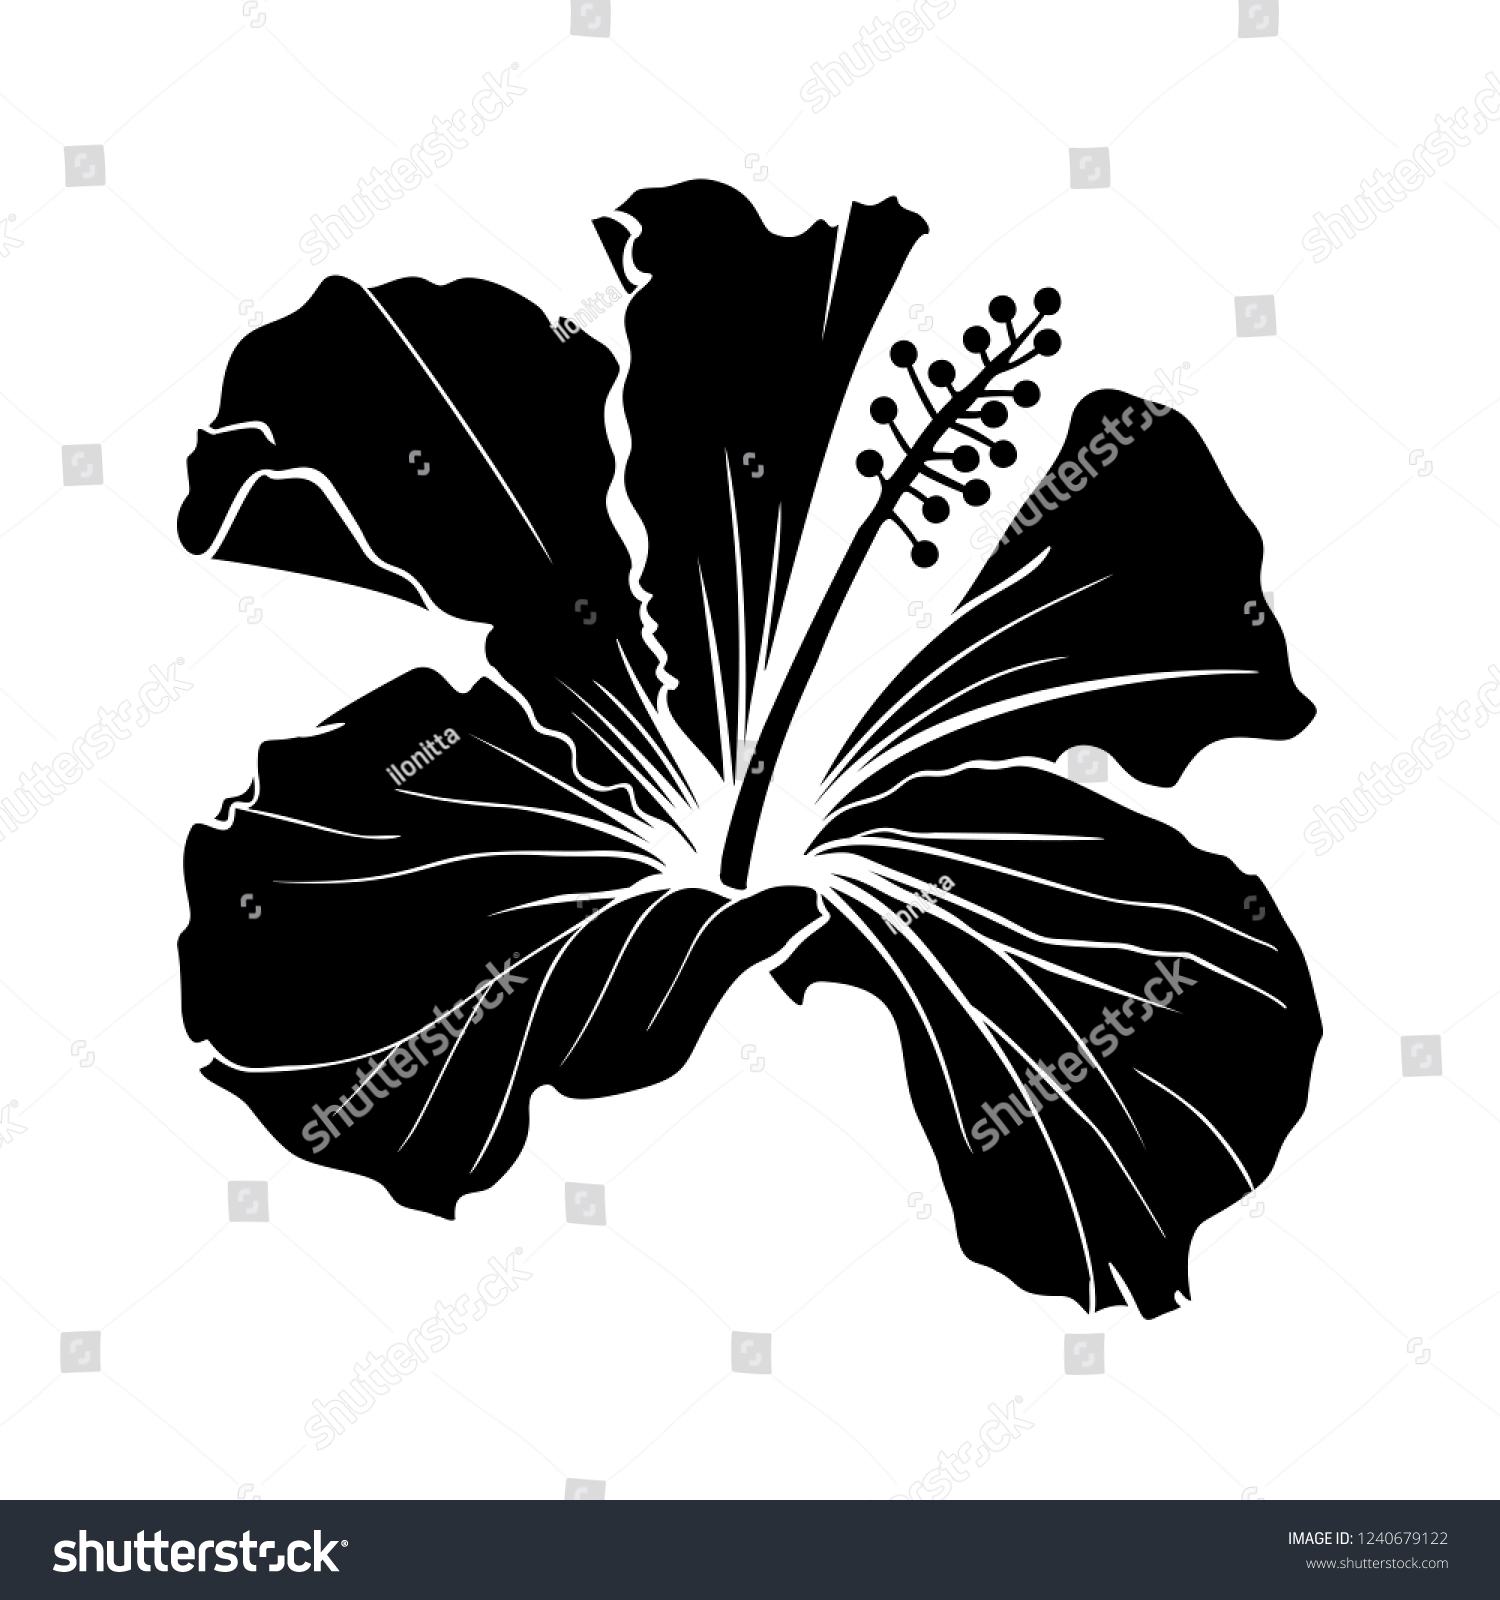 SVG of Hawaiian Hibiscus Laser Cut Vector Silhouette. Fragrance Flower. Mallow Chenese Rose. Black and White Flora. Isolated Botany Plant with Petals. Tropical Karkade or Bissap Herbal Tea, Crimson Blossom svg